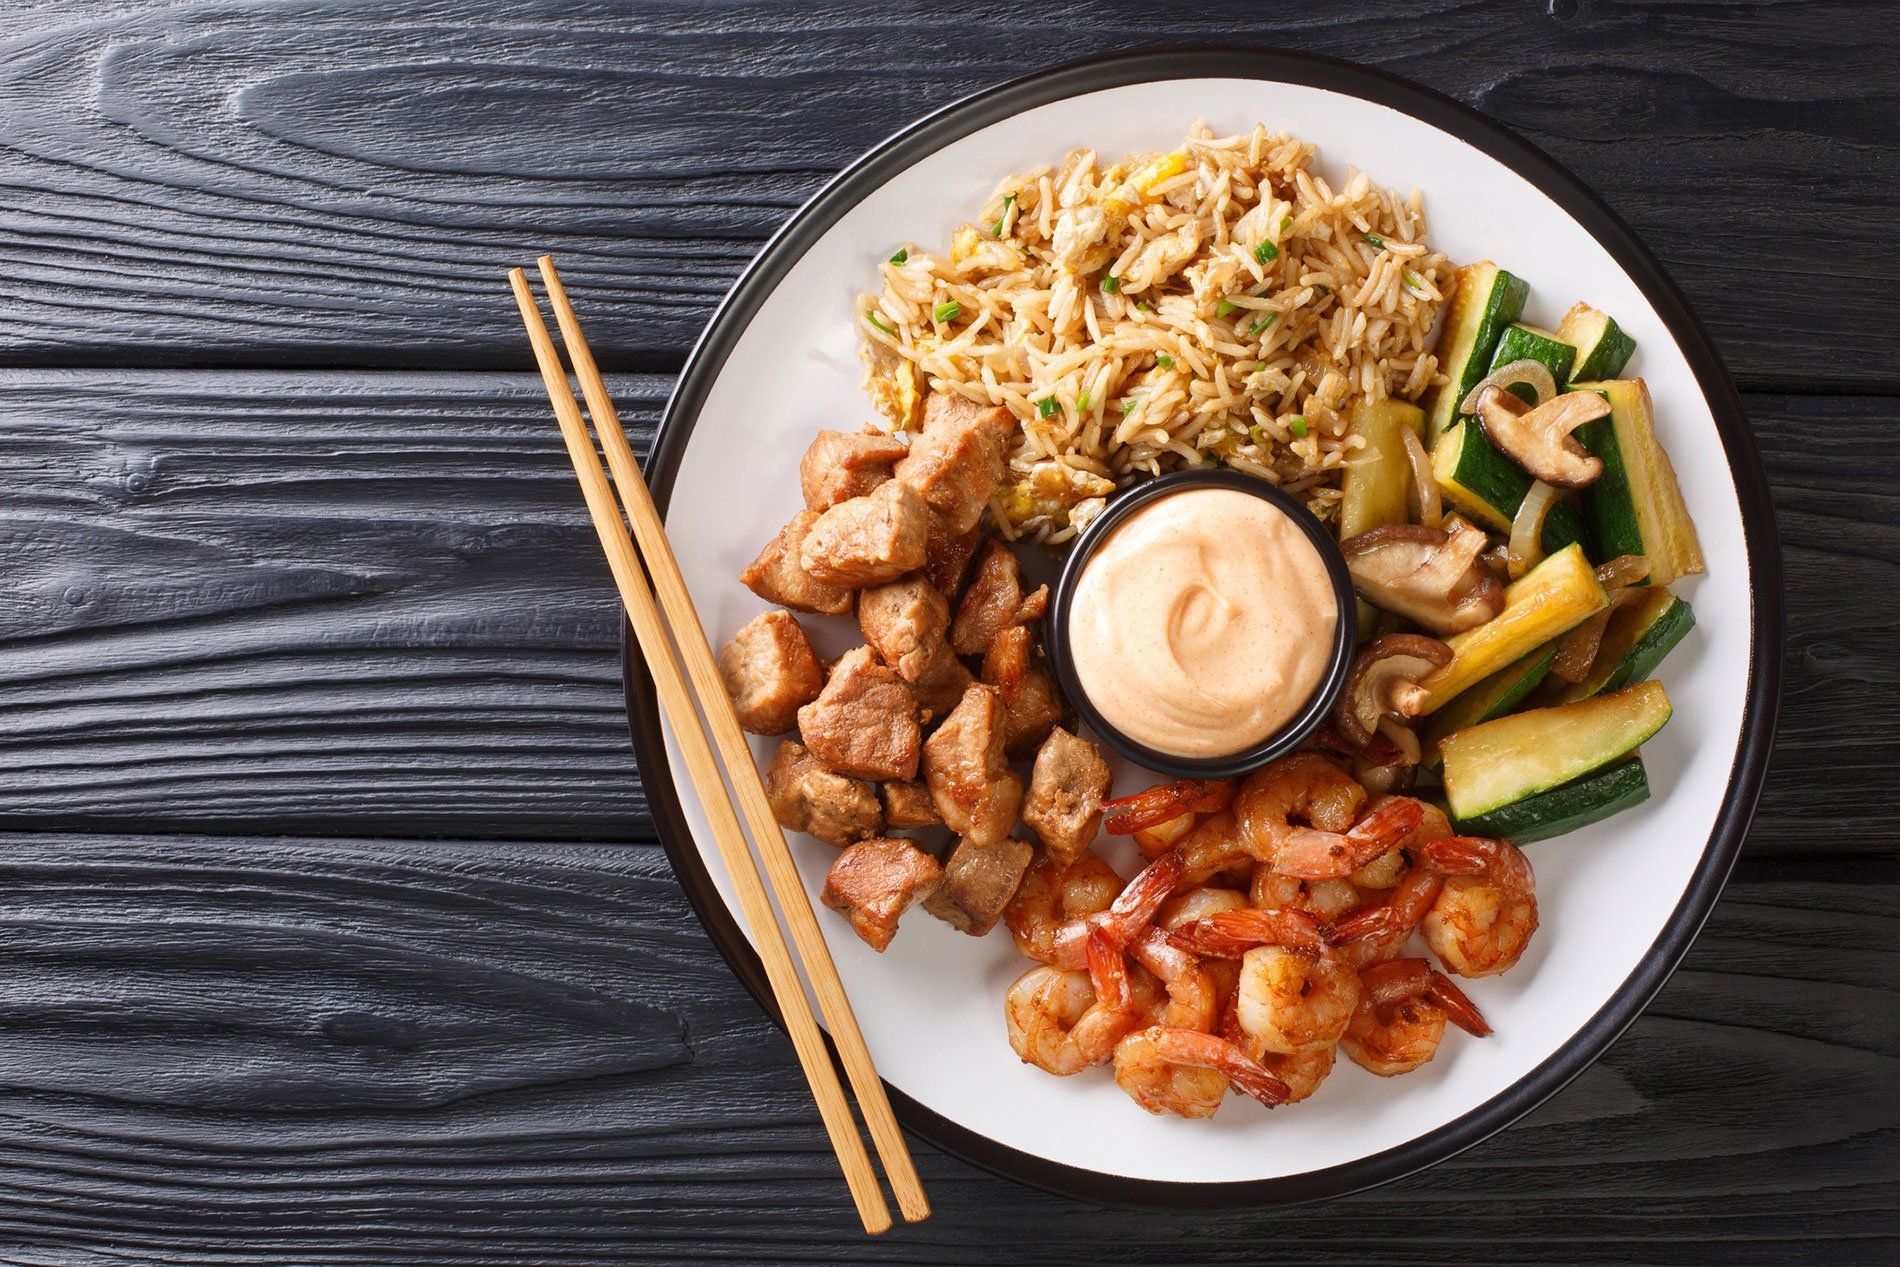 Serving hibachi of rice, shrimp, steak and vegetables served with sauce closeup in a plate. Horizontal top view